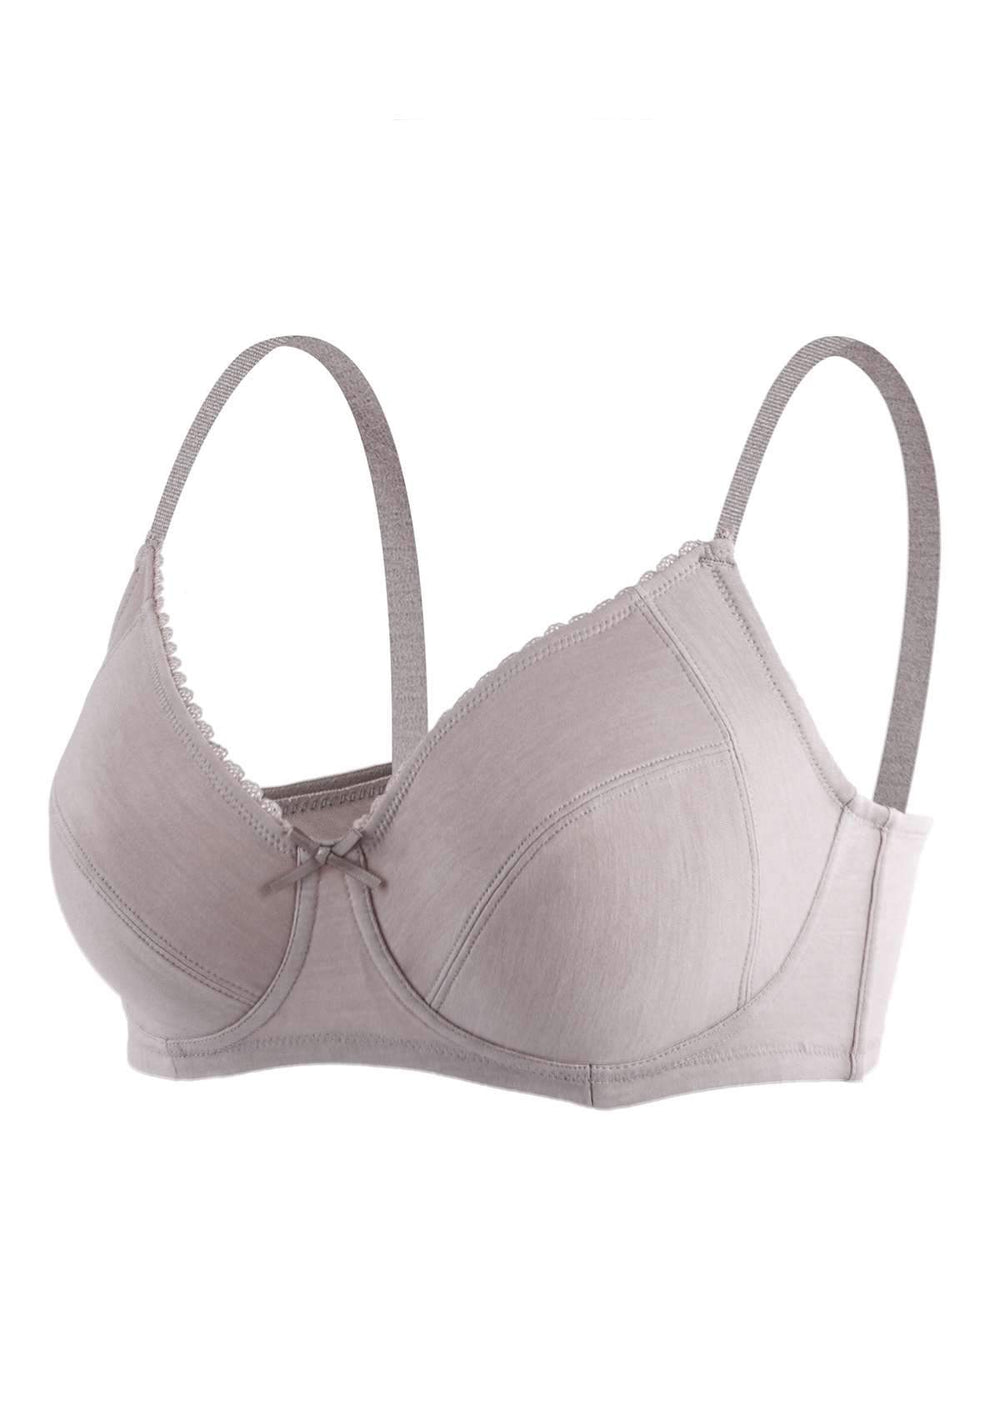 Plain Deevaz Cotton Everyday Bra - Blue, For Daily Wear at Rs 199